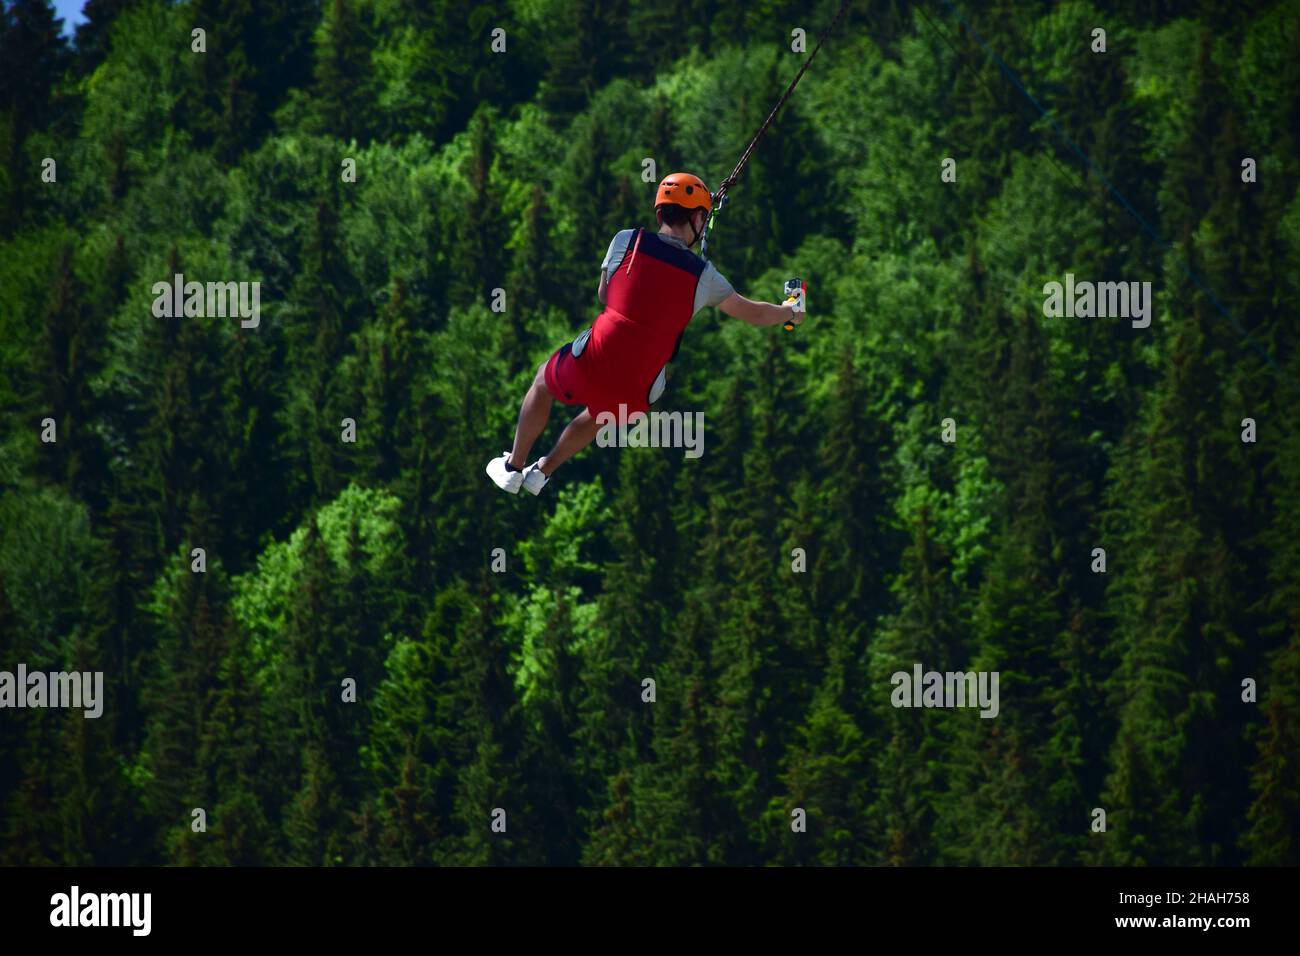 A young man in a helmet jumped from bungee jumping and now hangs on a rope, swinging and filming himself on a sports video camera against a blurred ba Stock Photo